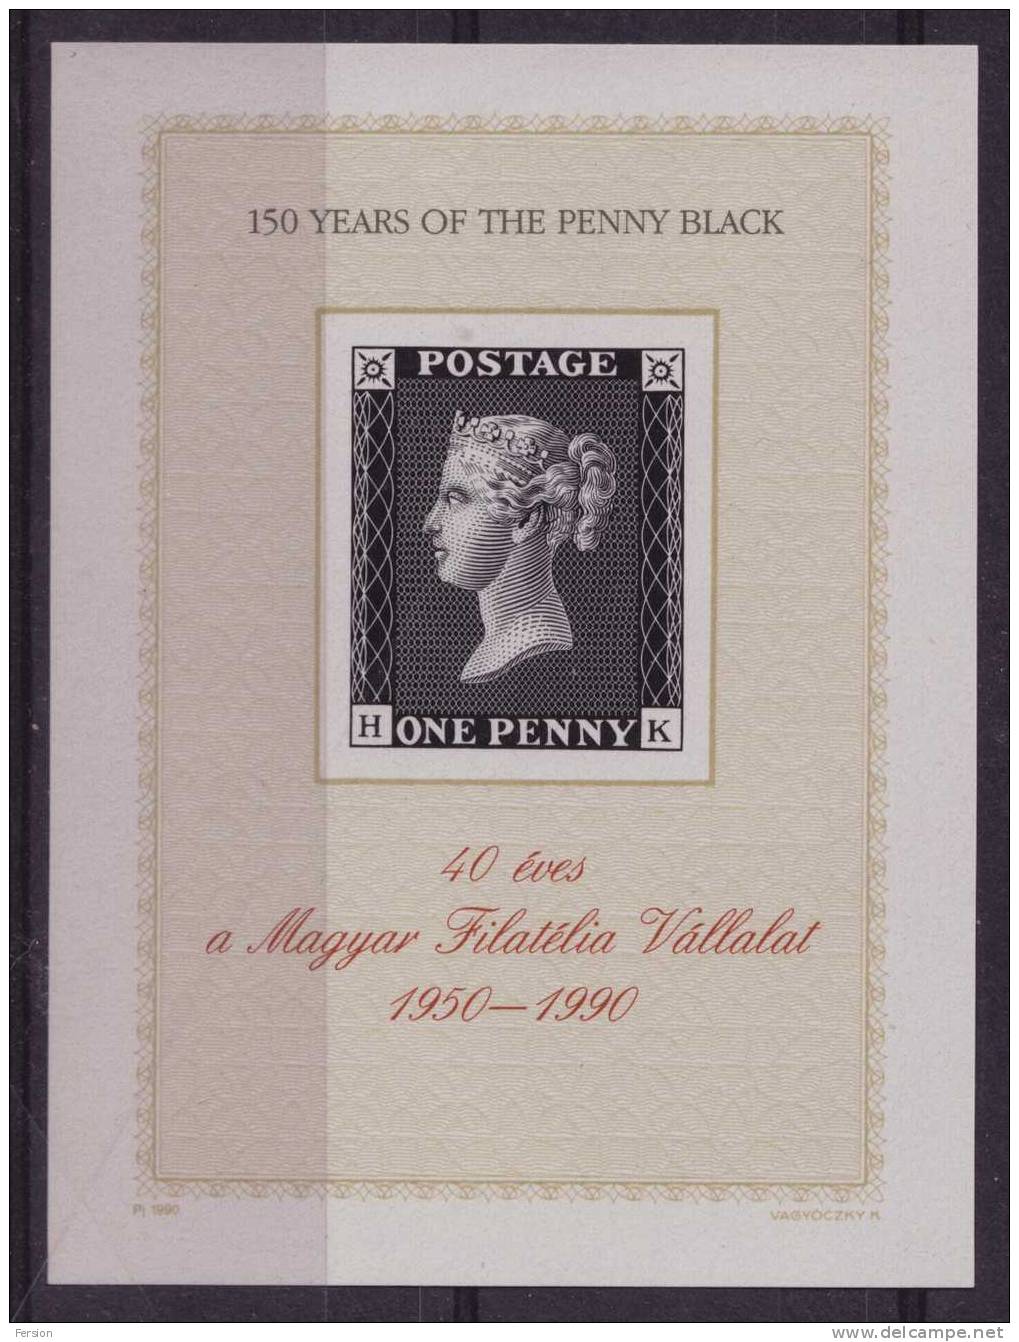 Hungary - 1990 - 150 Years Of The BLACK PENNY - Philatelist Memorial Sheet - Commemorative Sheets